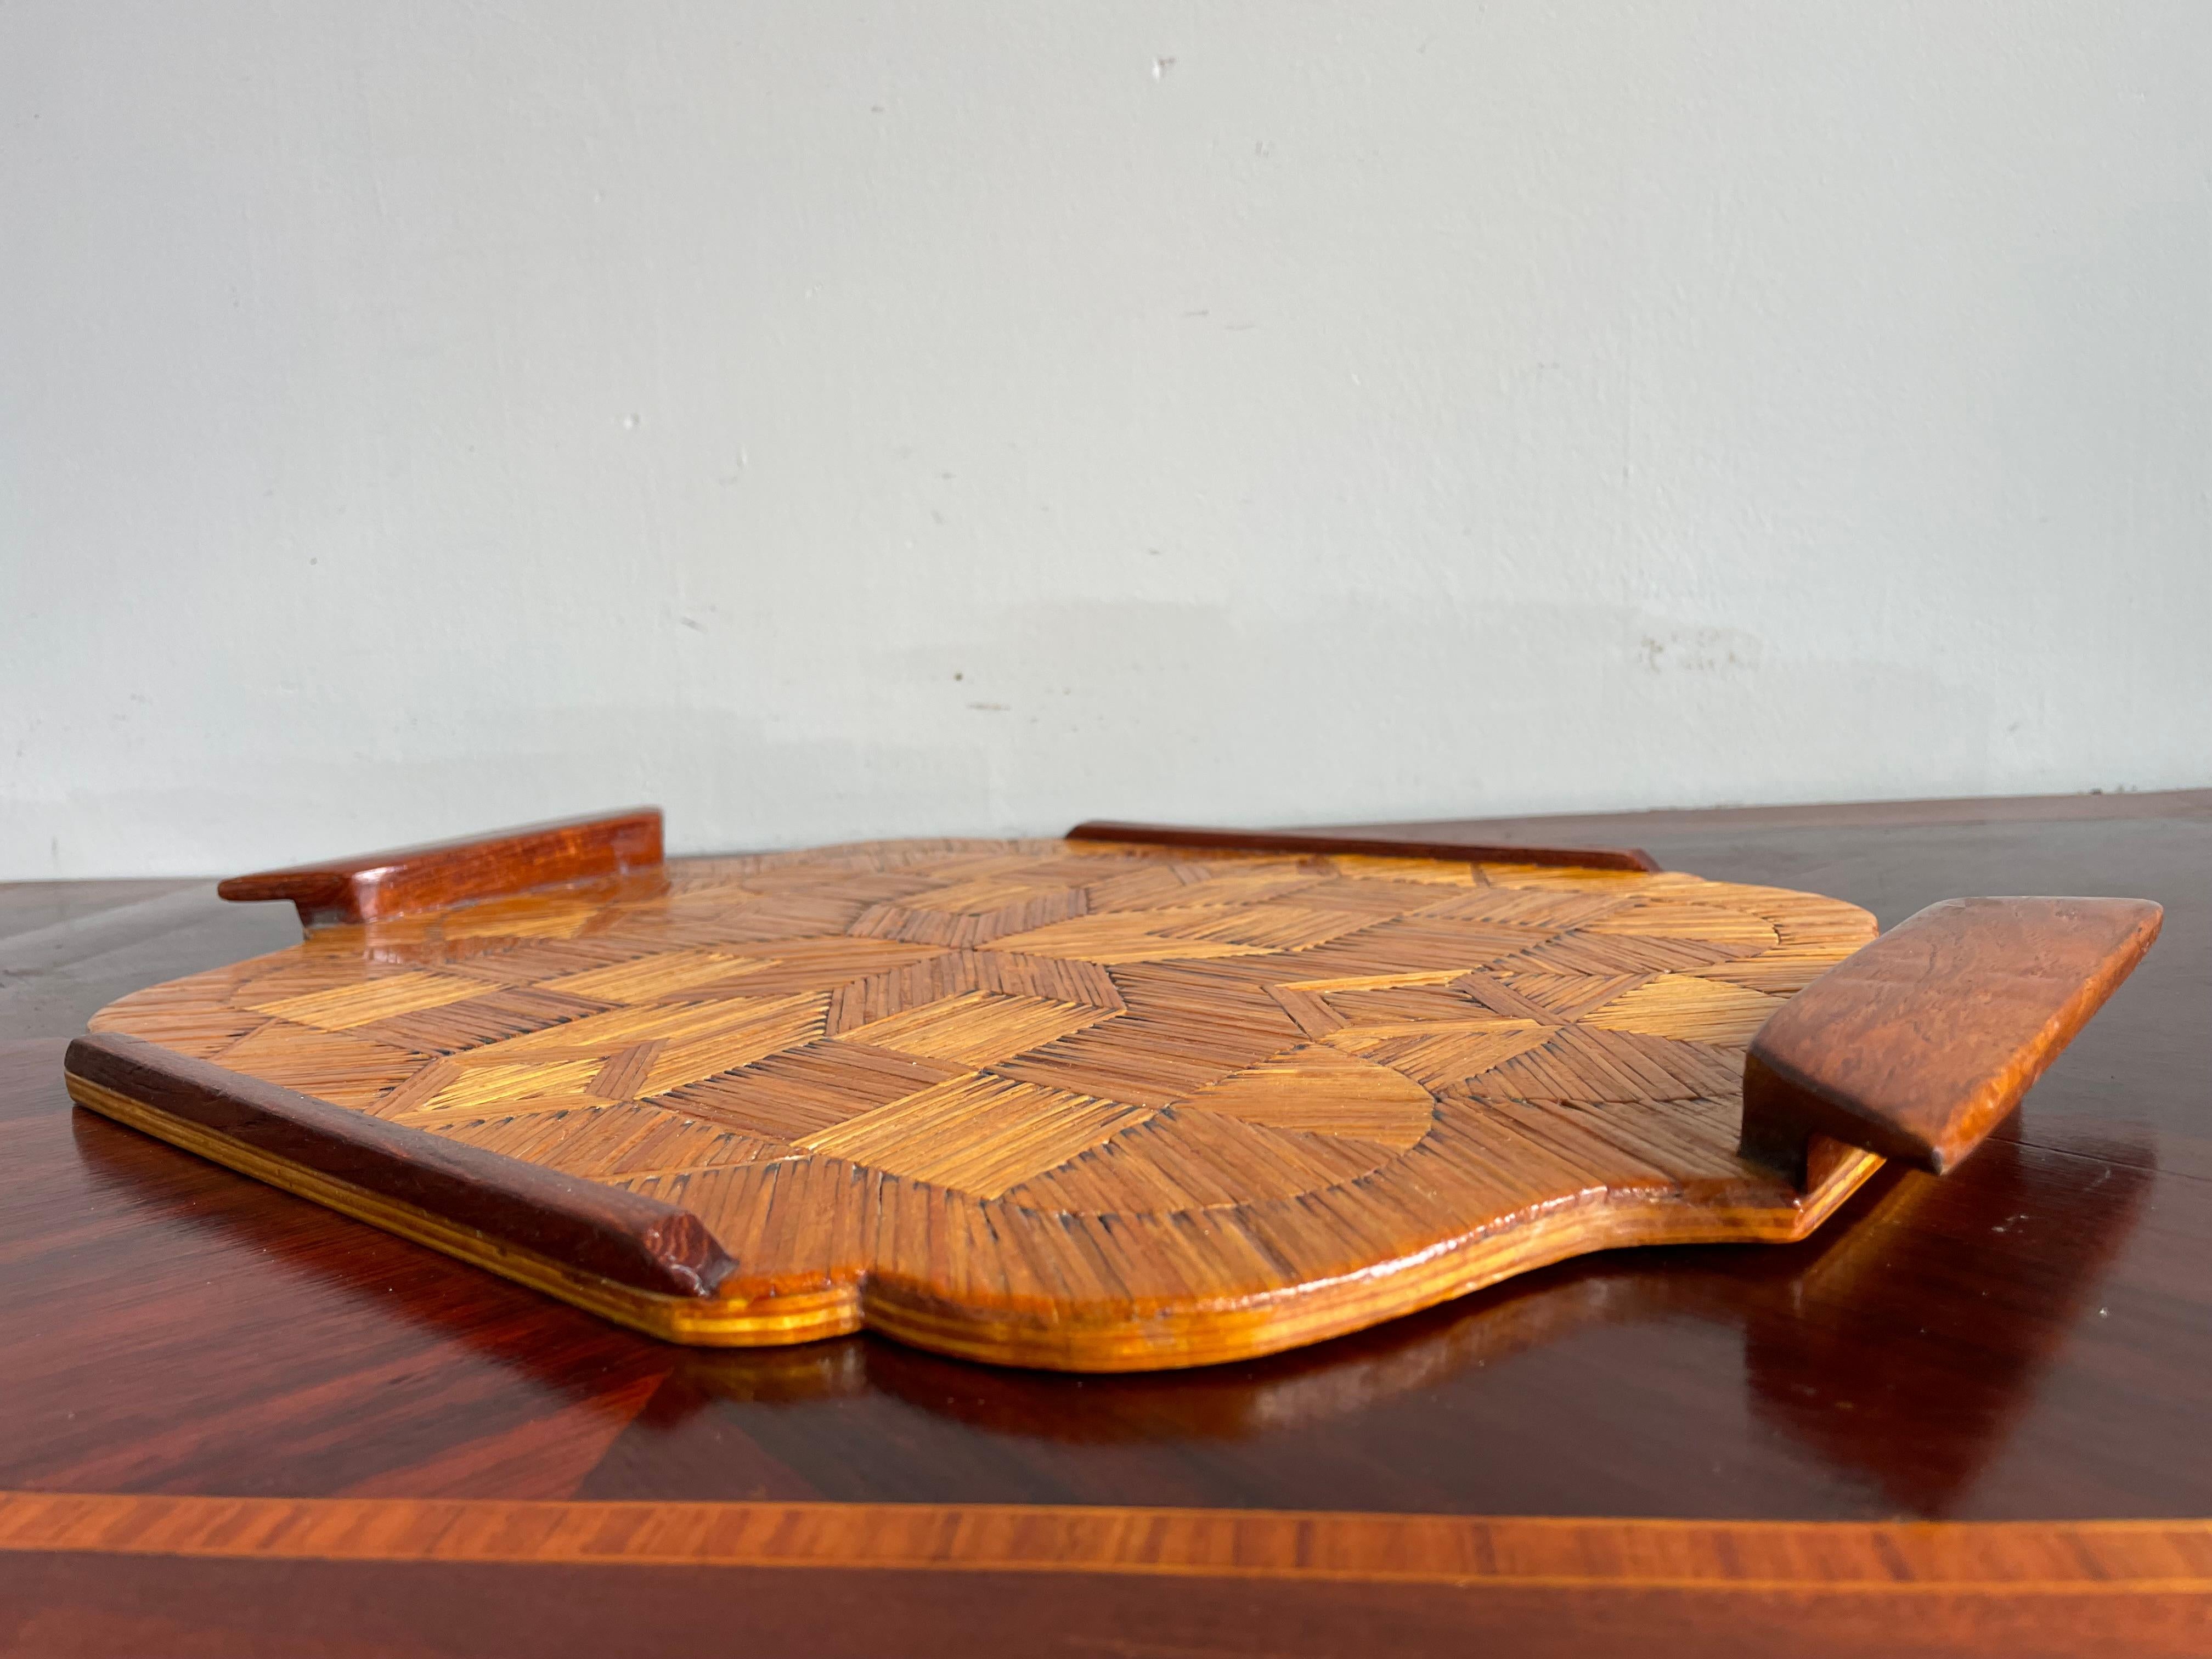 Midcentury Folk Art Serving Tray, Handmade of Burnt Matches in Parquetry Pattern For Sale 3